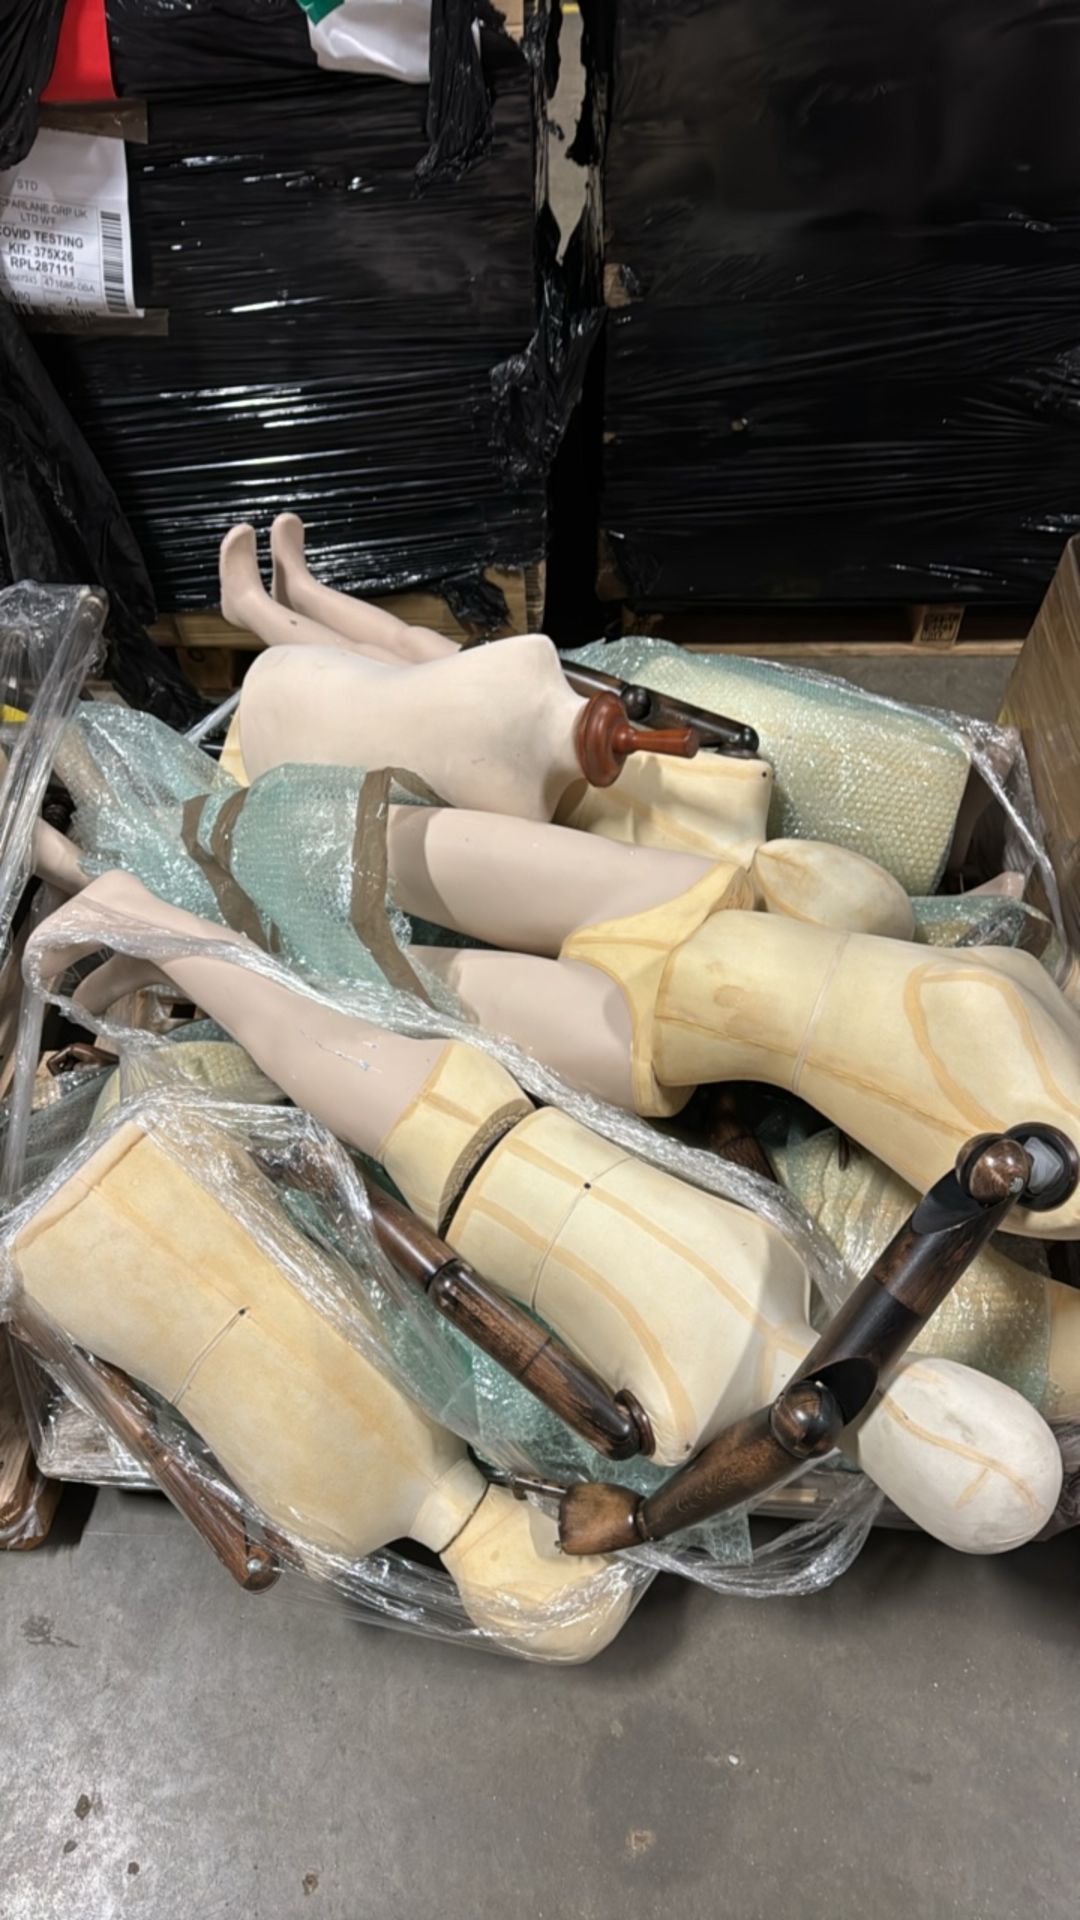 Pallet Of Mixed Manequin Busts - Image 2 of 2